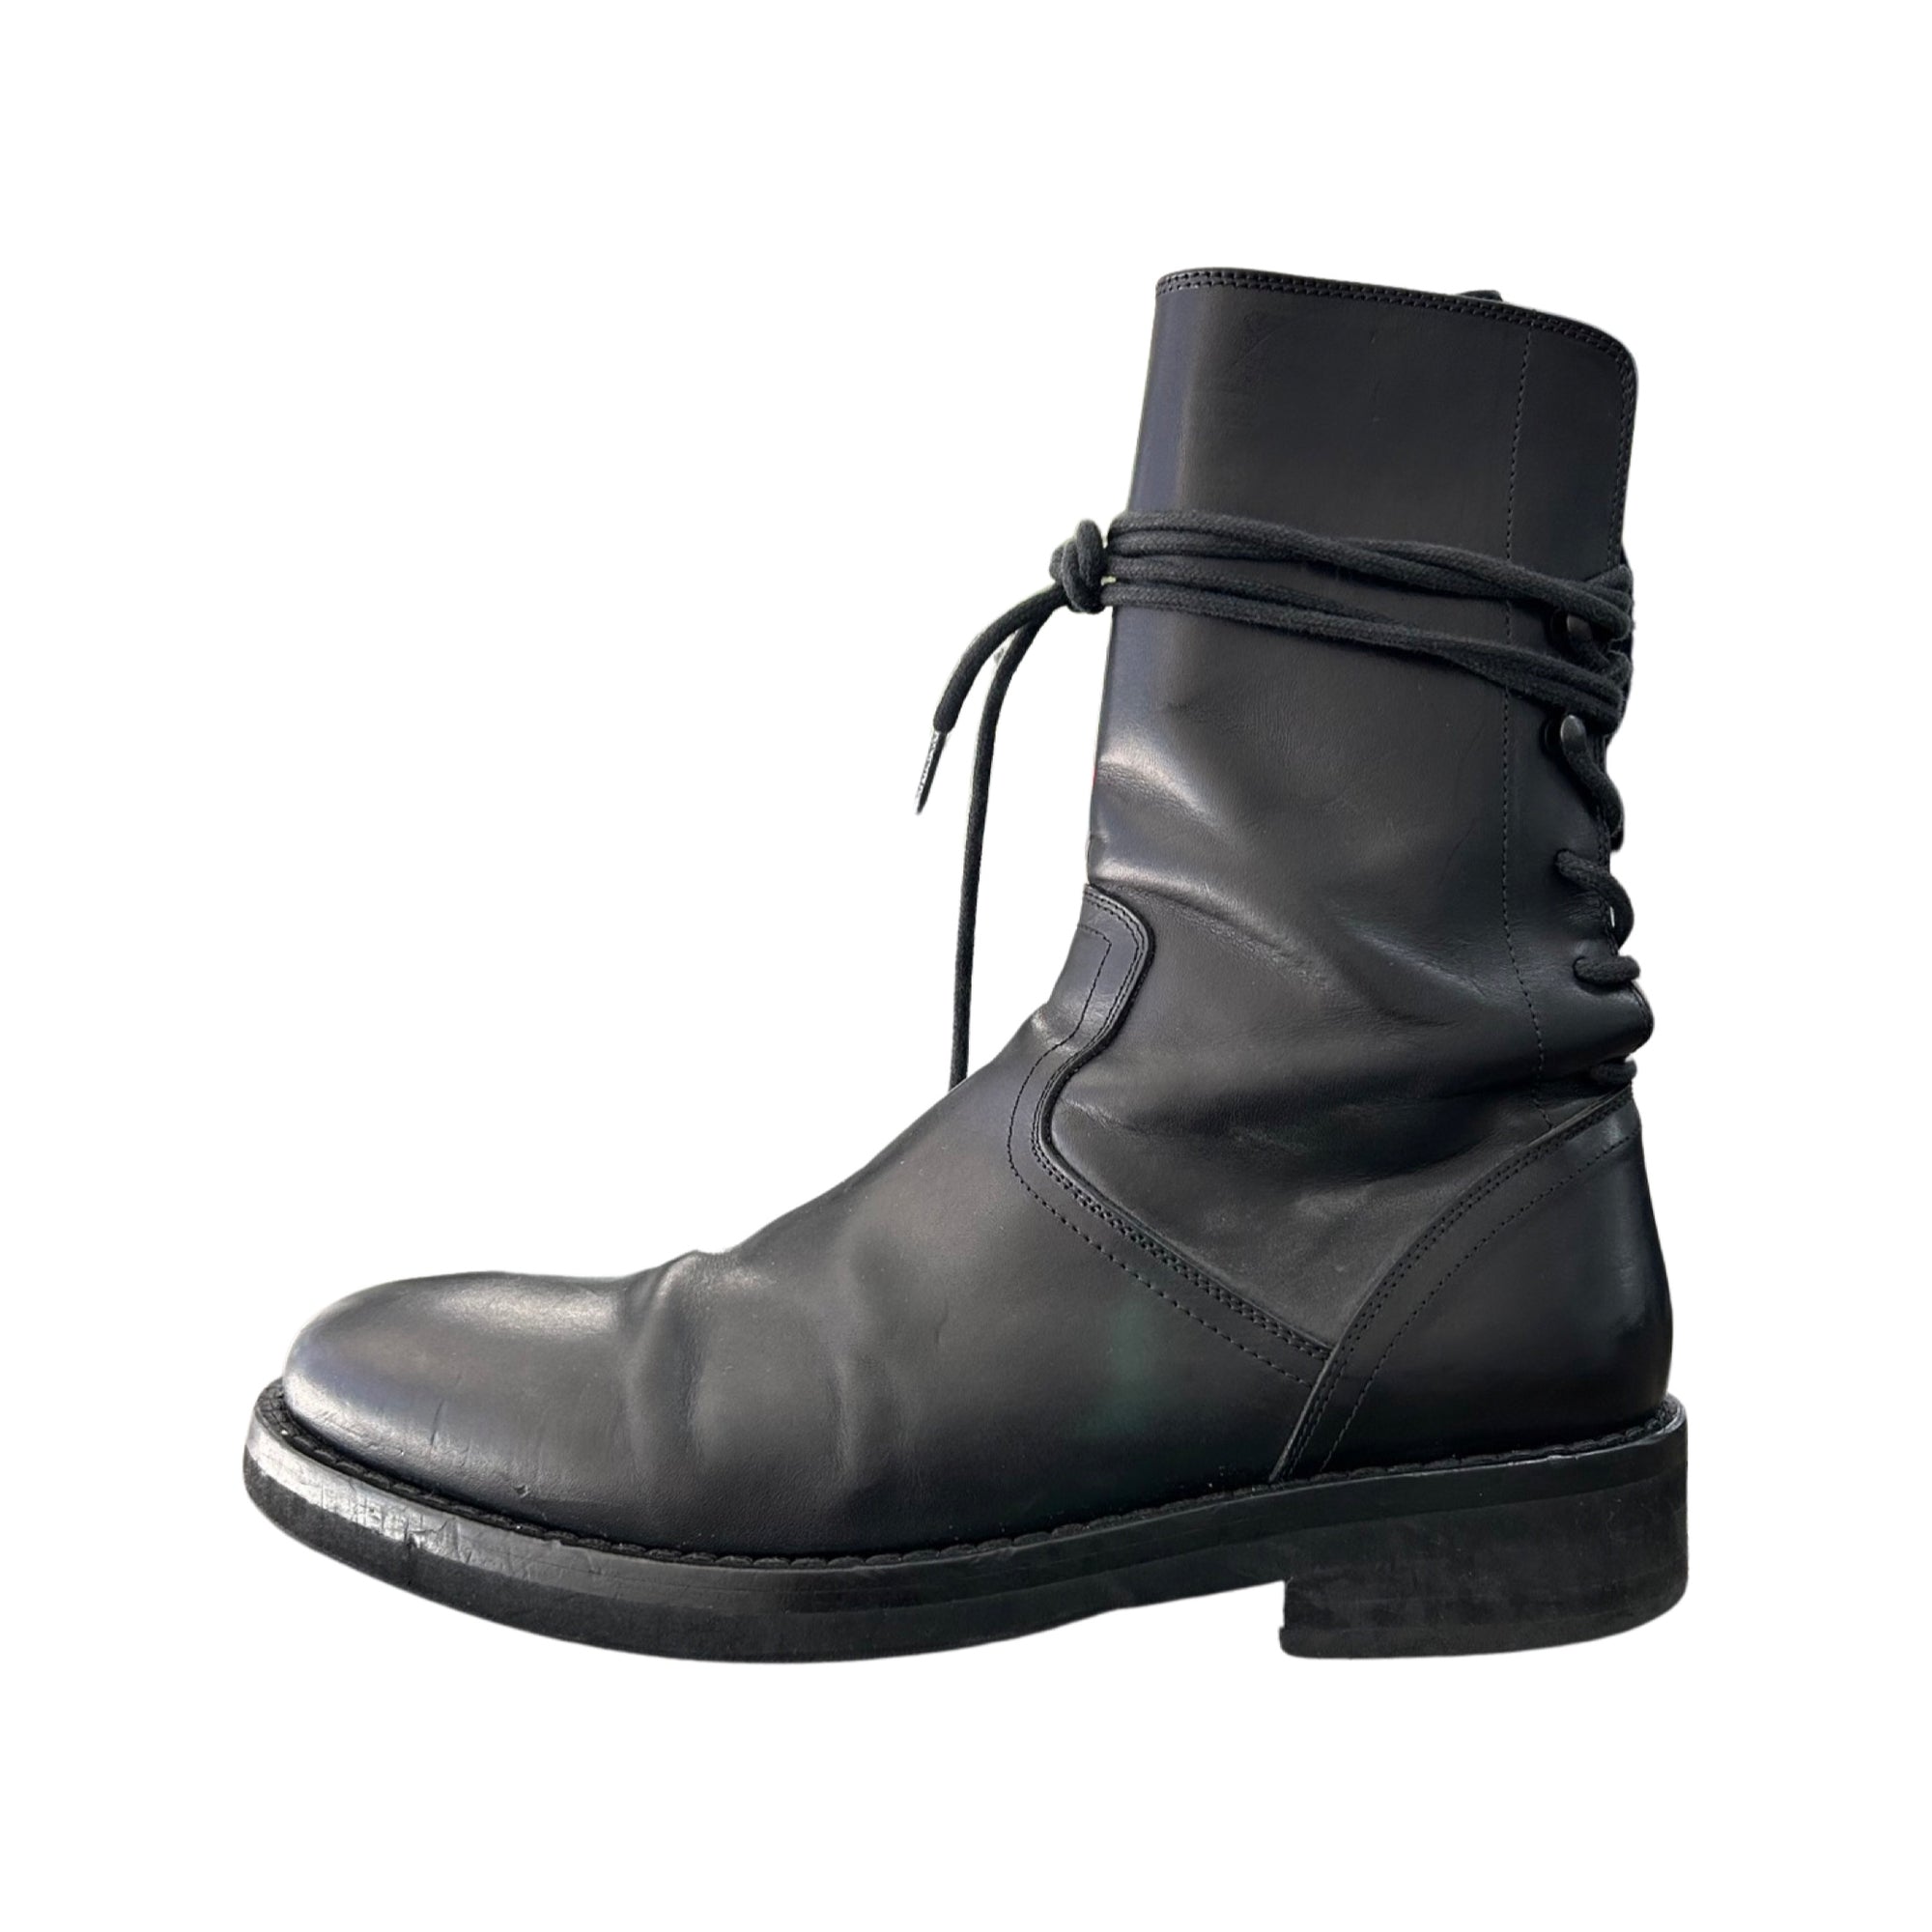 ANN DEMEULEMEESTER BACKLACE BOOTS